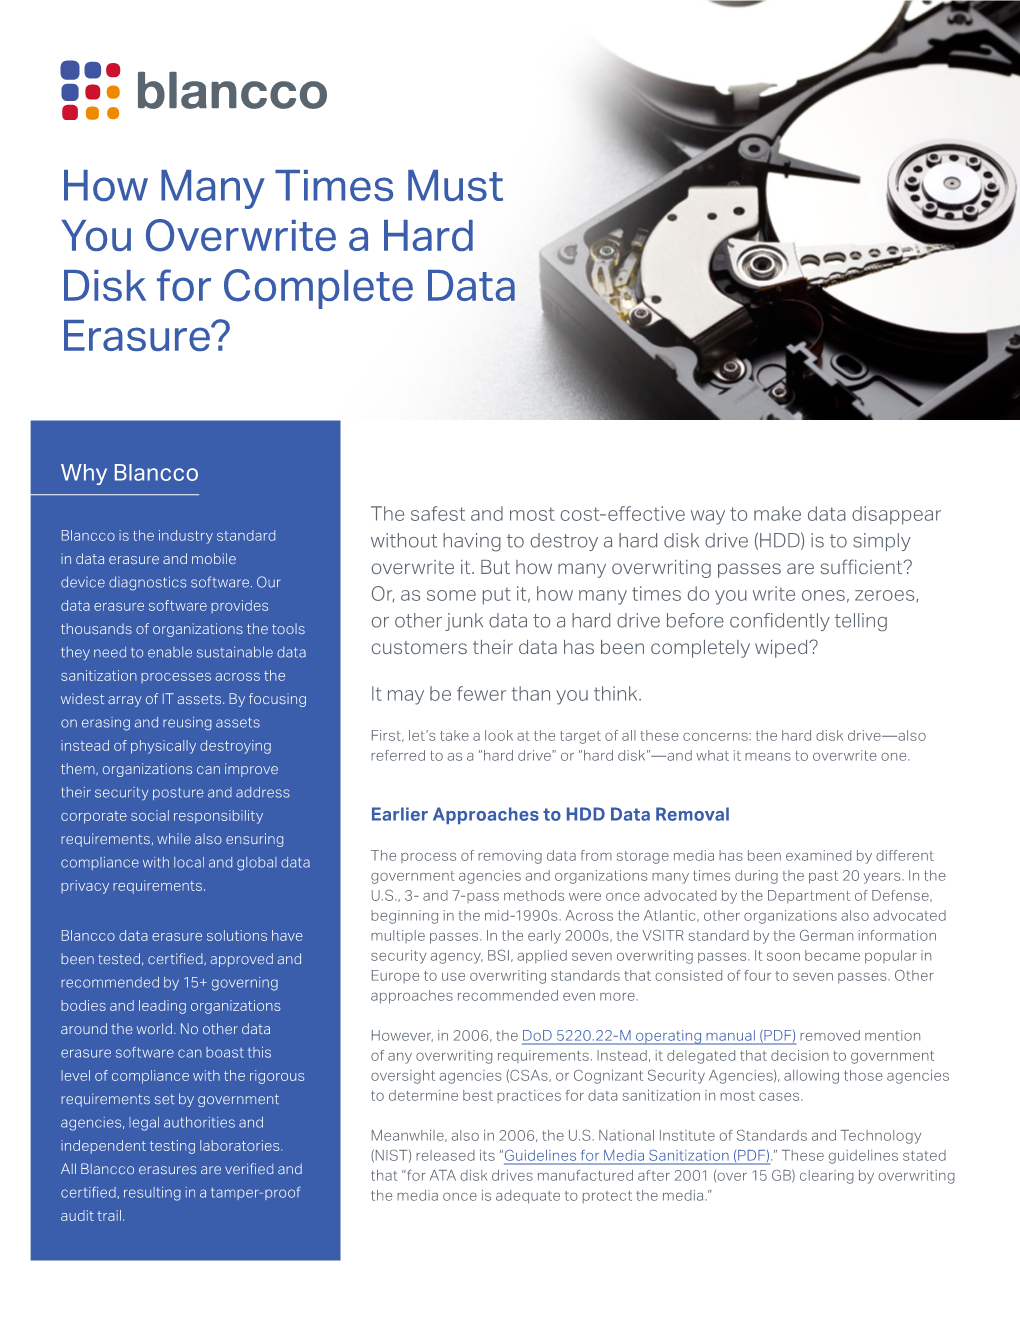 How Many Times Must You Overwrite a Hard Disk for Complete Data Erasure?